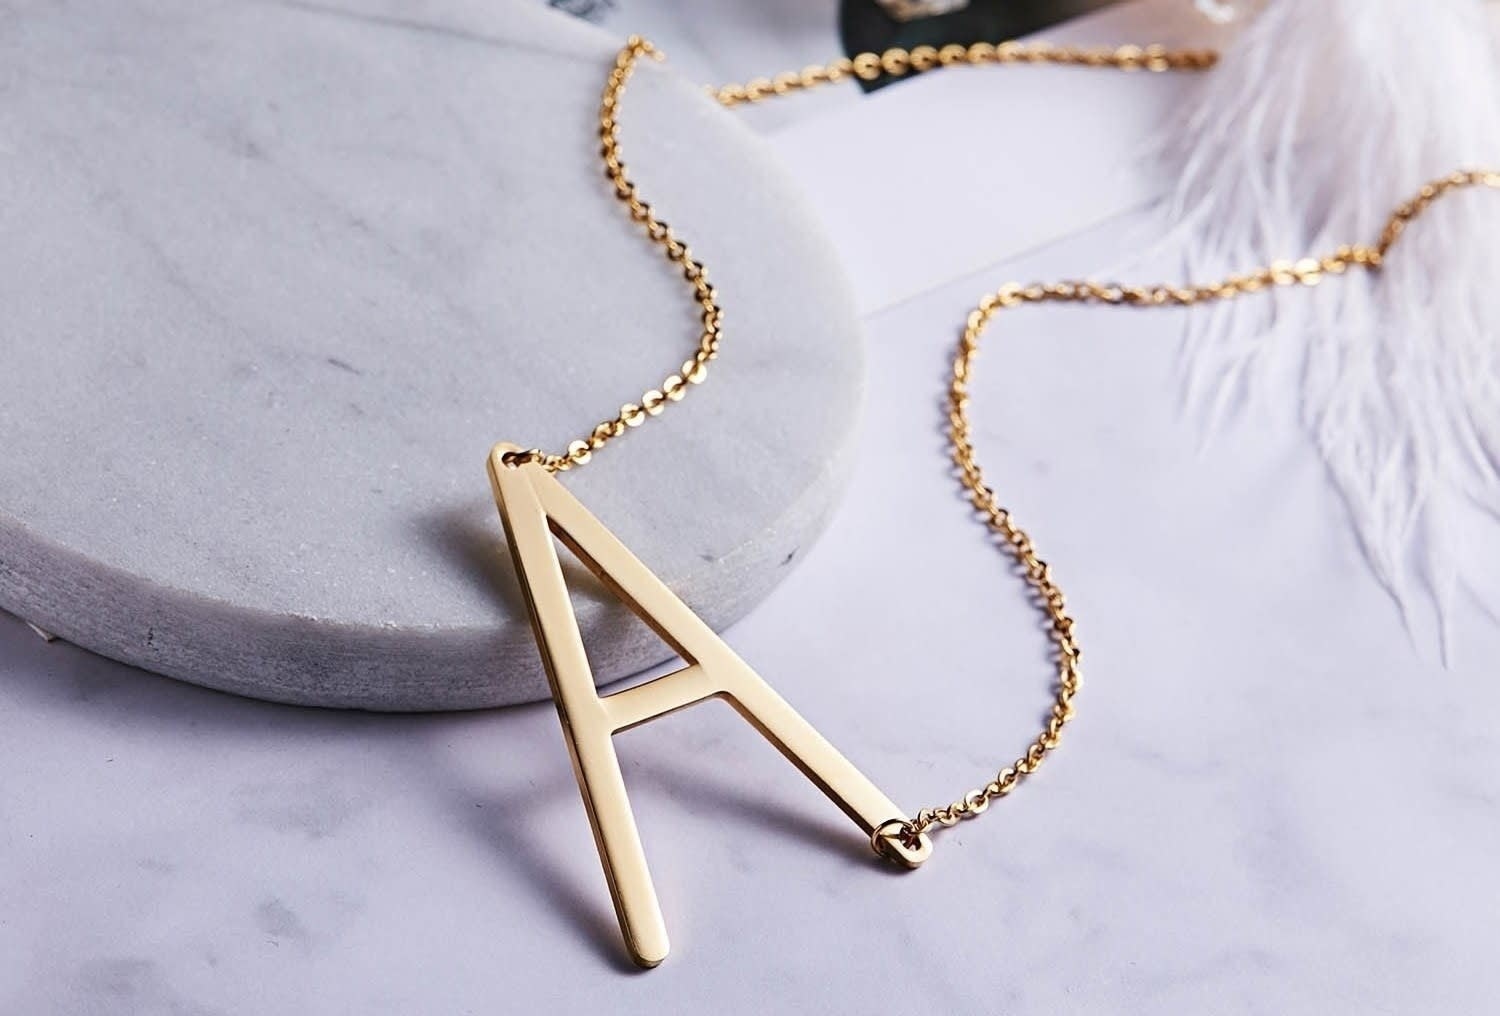 Sideways Letter K Initial Necklace - Silver & Gold